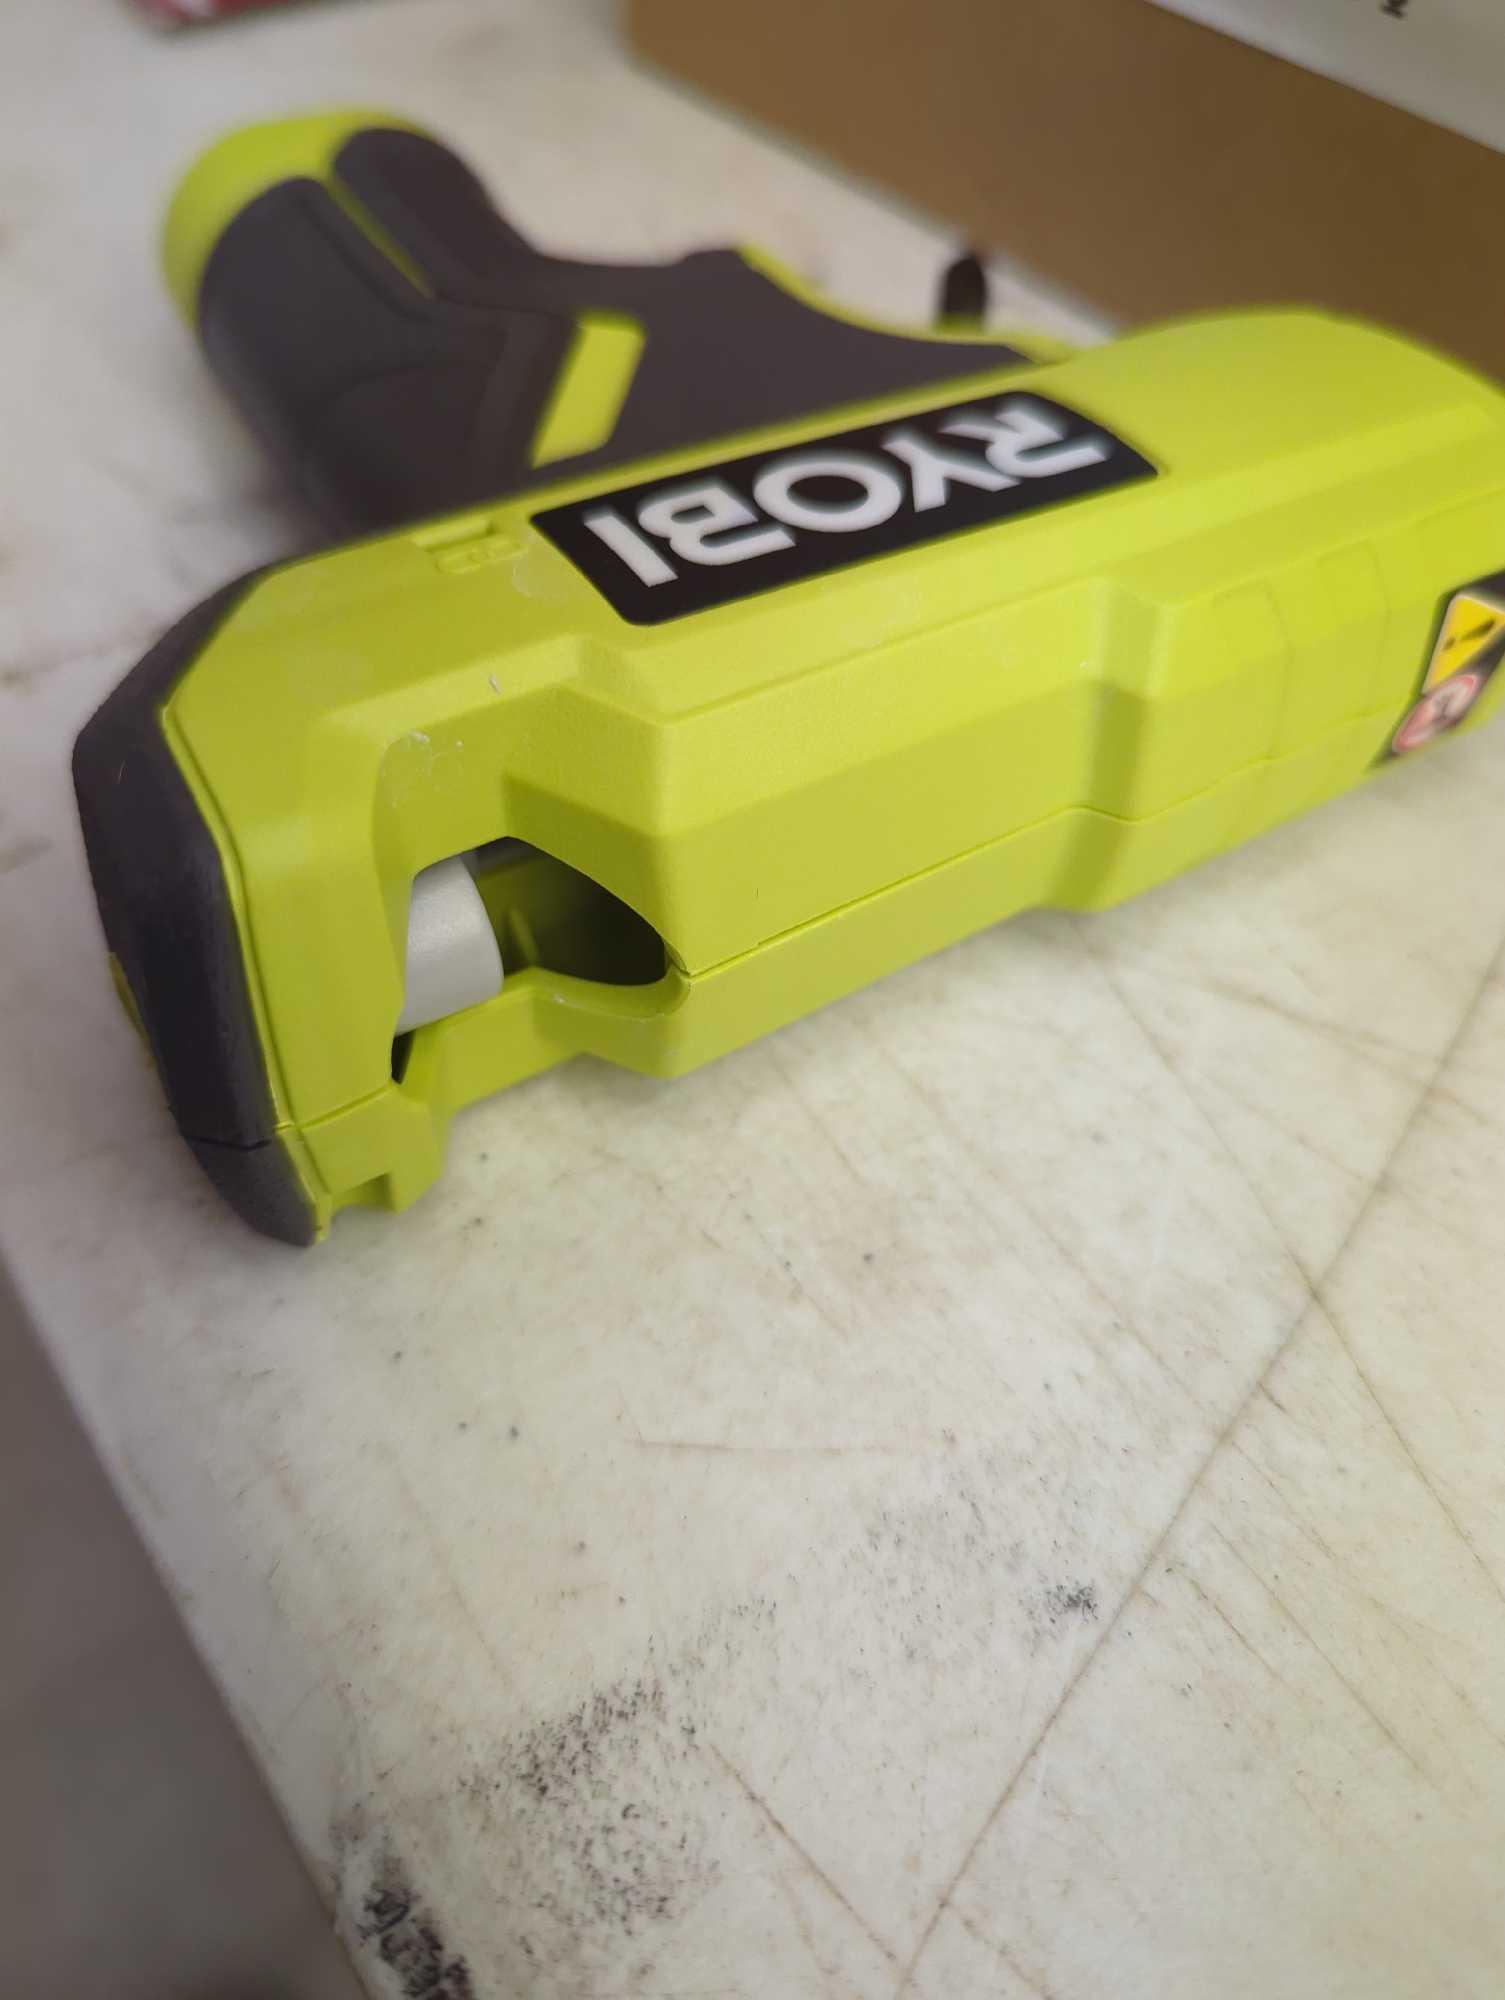 (No Battery) RYOBI ONE+ 18V Cordless Compact Glue Gun Kit with 18V Charger, Appears to be New in